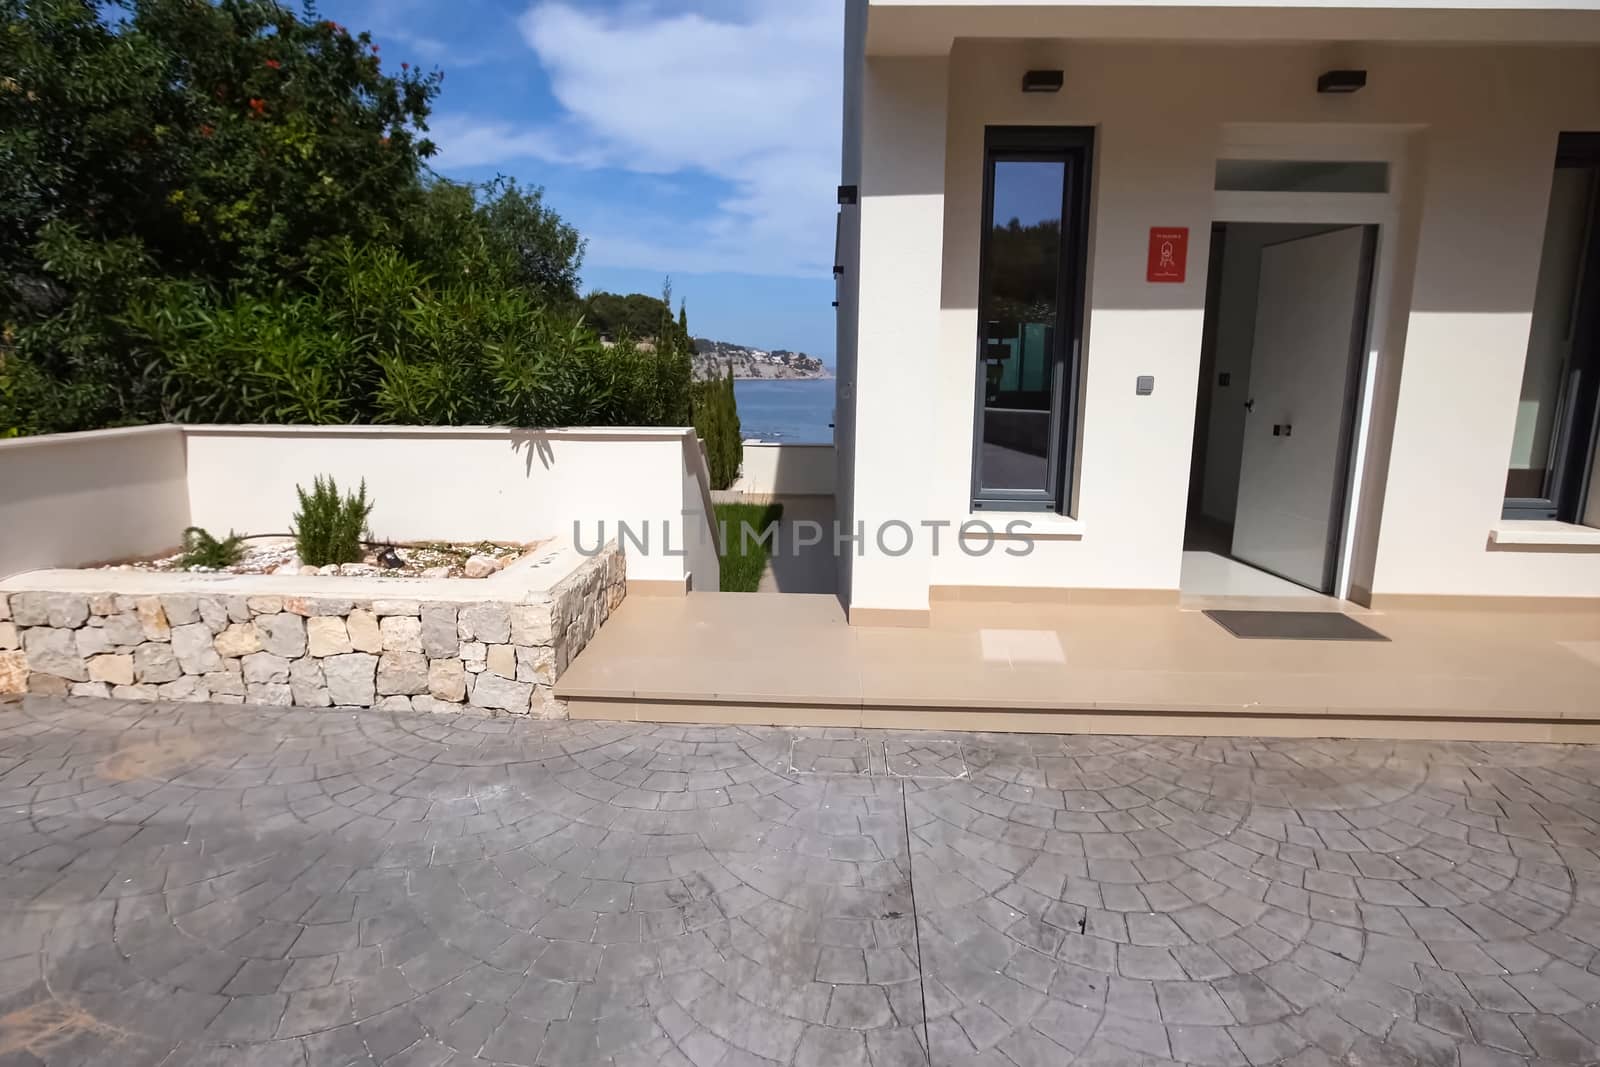 A house in Spain by the sea. Two-storey cottage with their amenities.